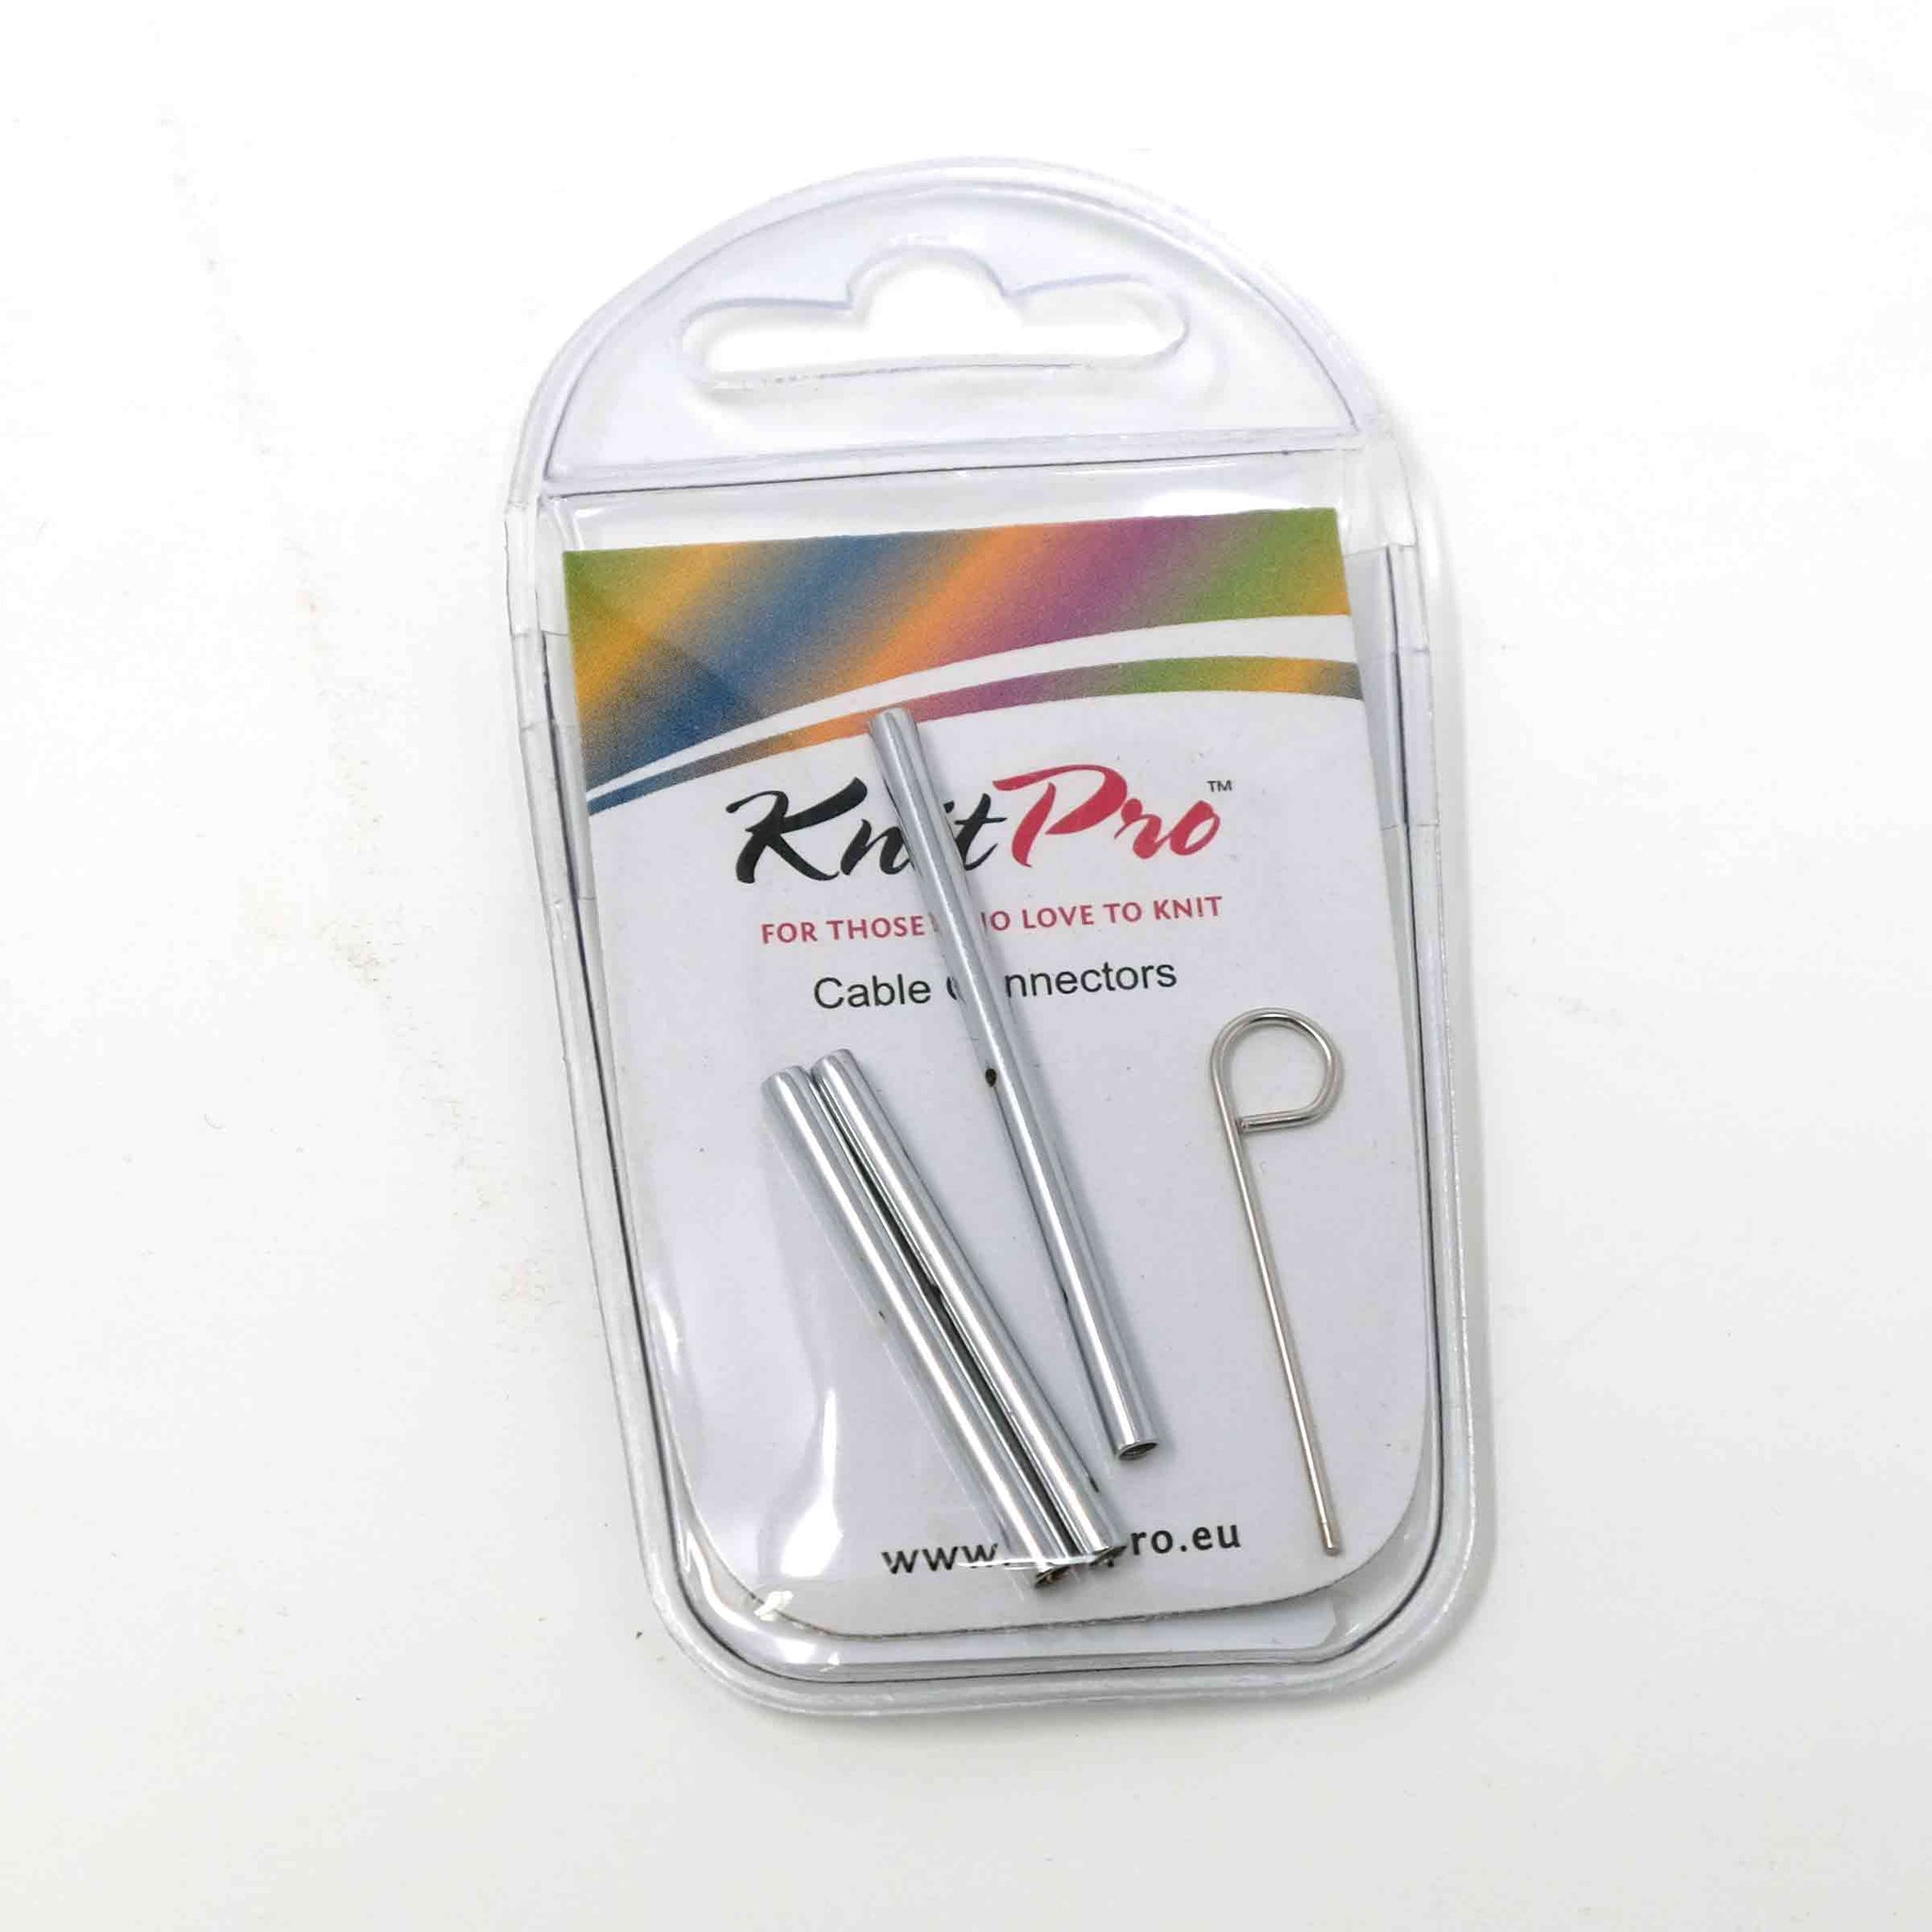 KnitPro Symfonie Wooden Interchangeable Circular Knitting Needle Cable Connectors